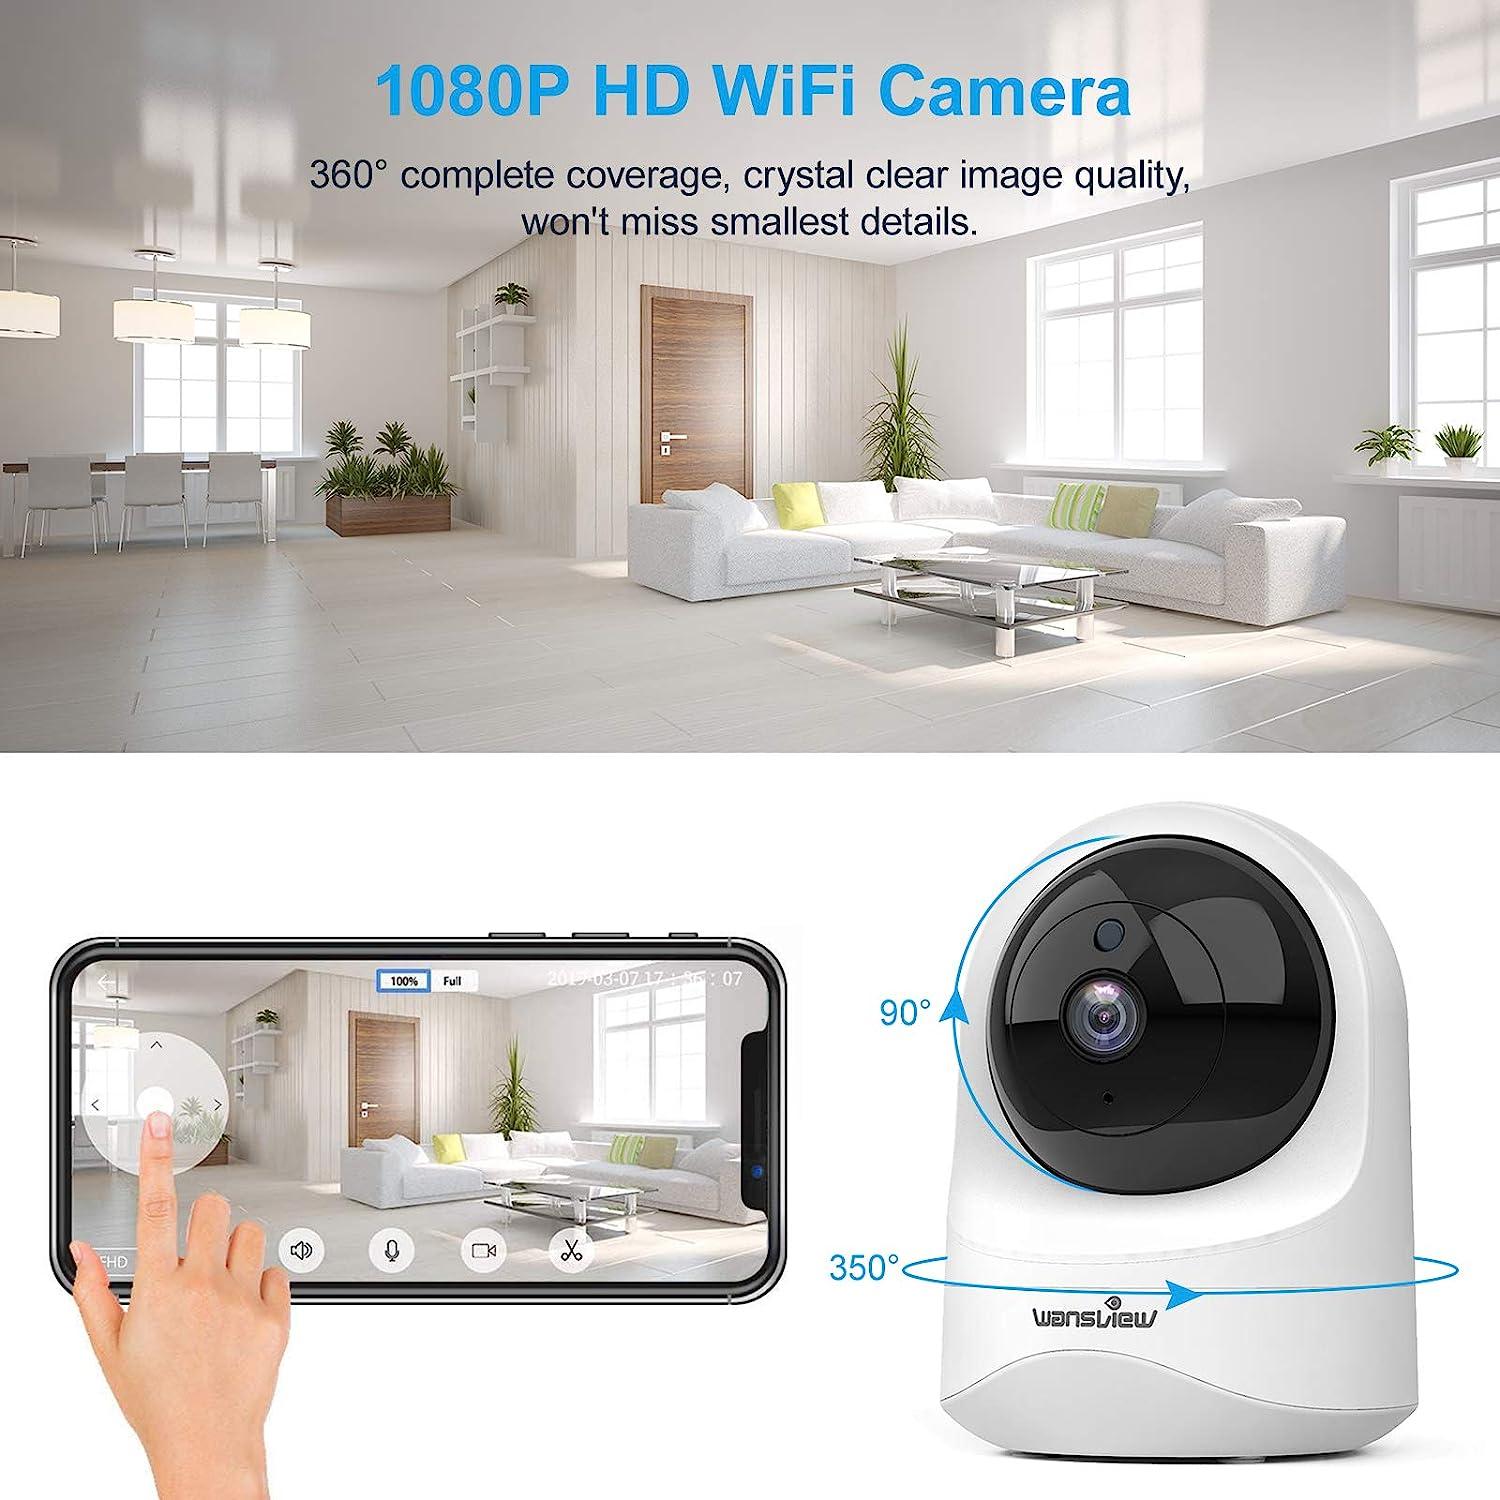 s Top Selling IP Camera Wansview - Cyber Security Tested